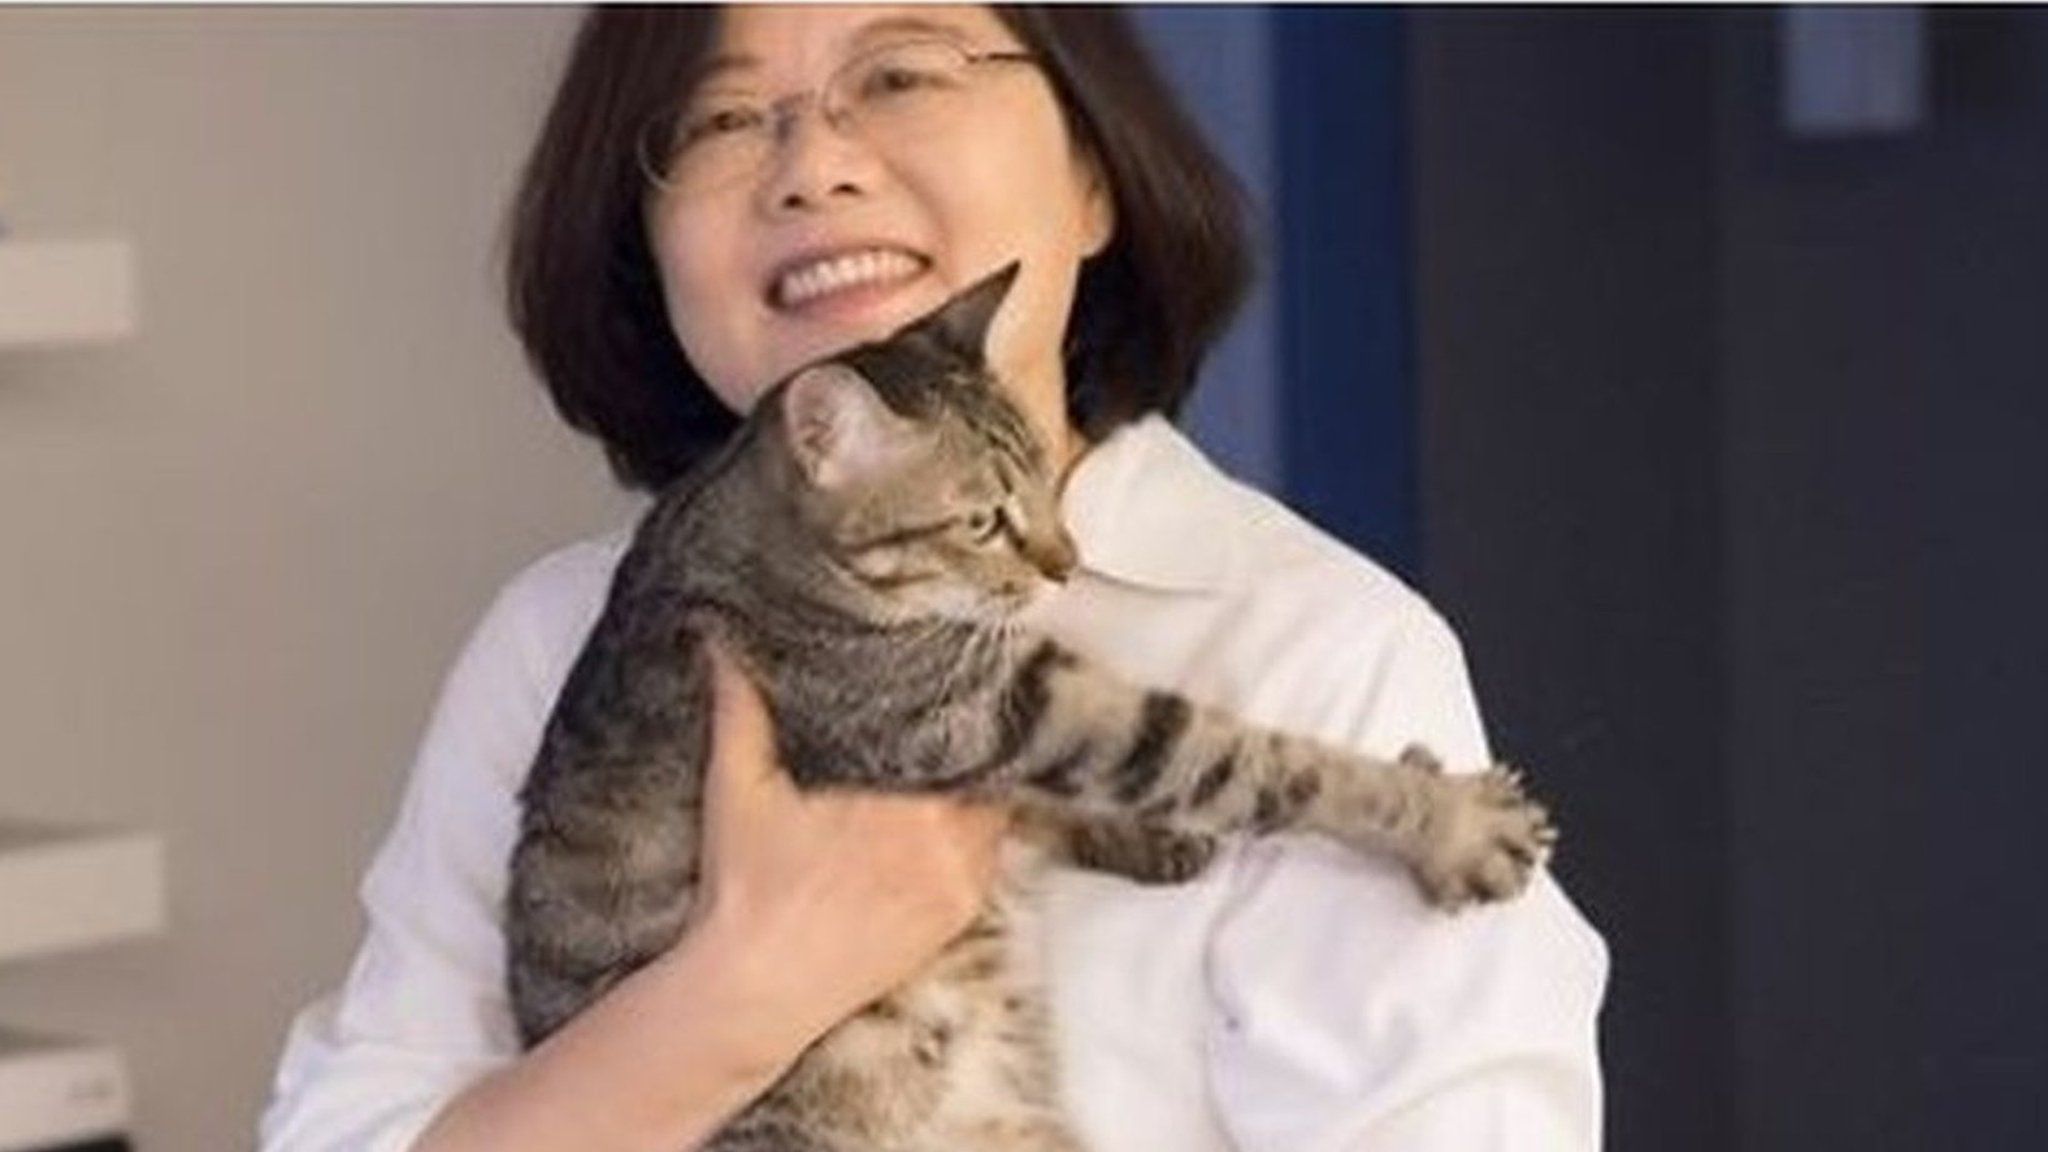 Screengrab of Tsai Ing-wen's Facebook post about her cats, made on 21 January 2016